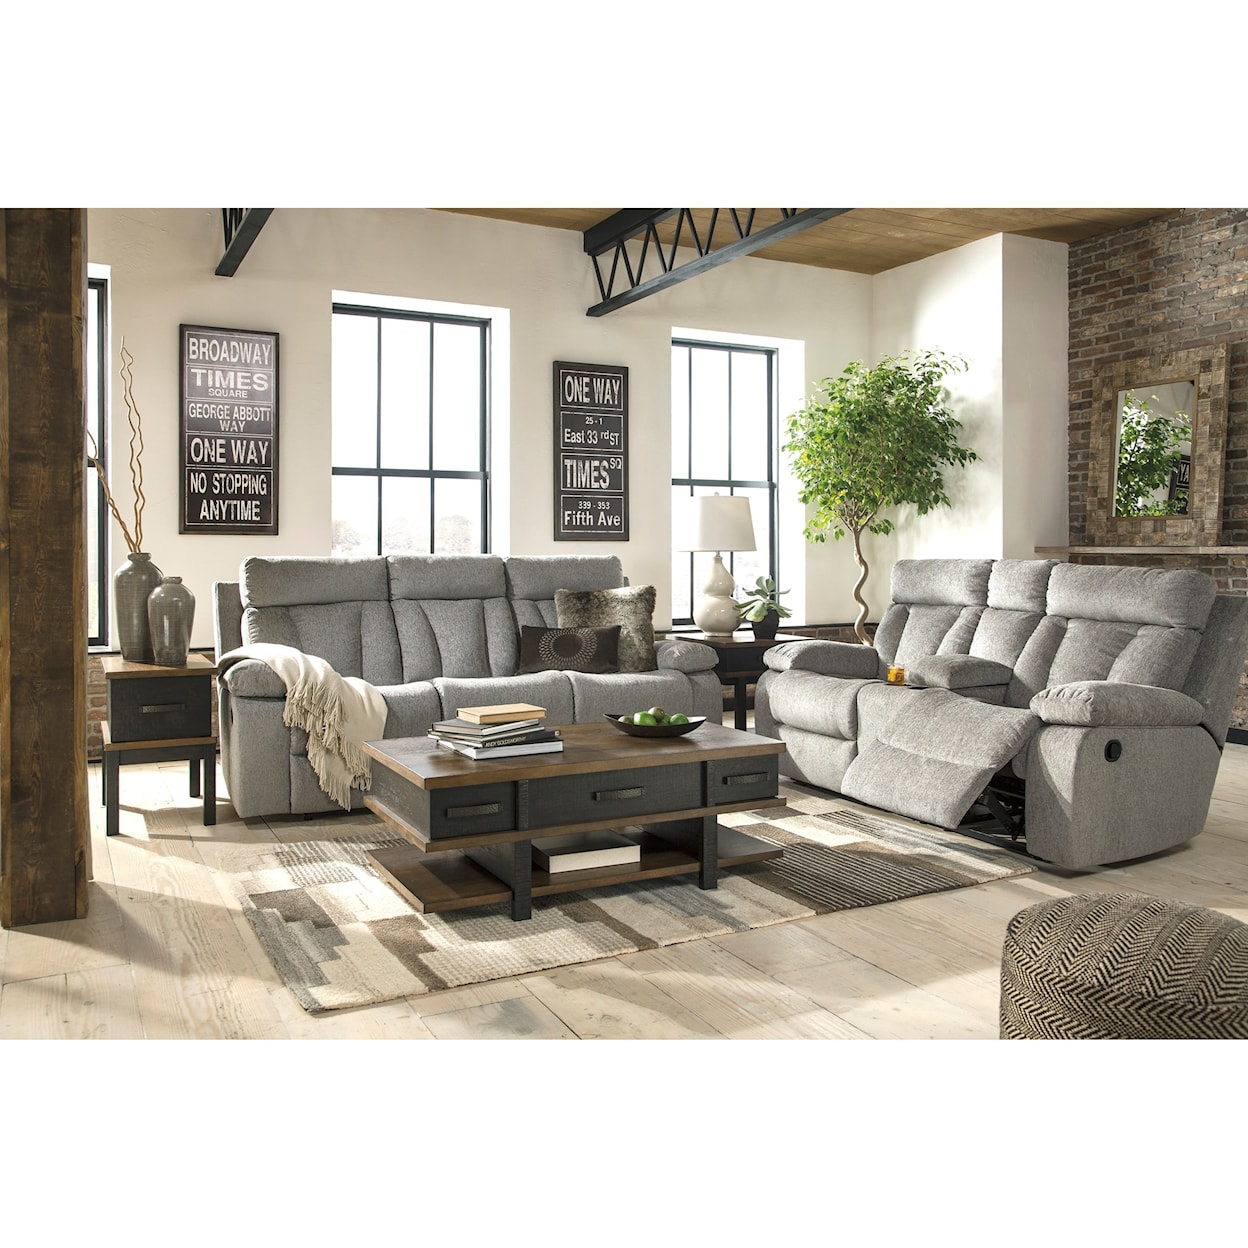 Signature Design by Ashley Mitchiner Reclining Living Room Group